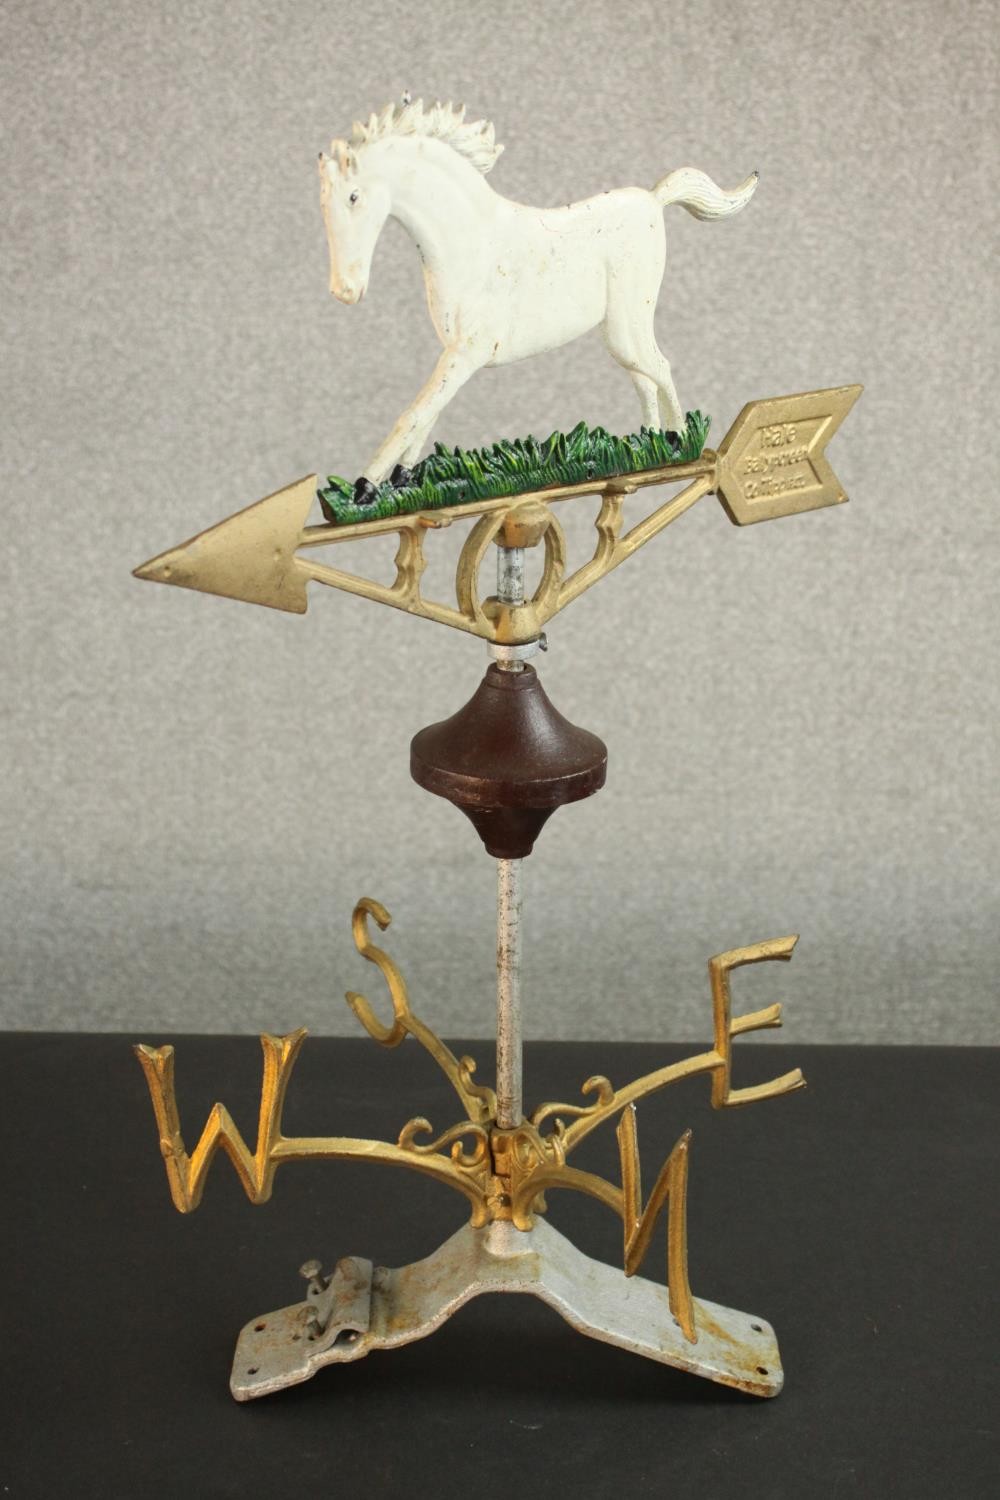 A hand painted white horse cast iron weather vane by Hale Ballyporeen Co Tipp Pat. H.59 W.47cm. - Image 7 of 7